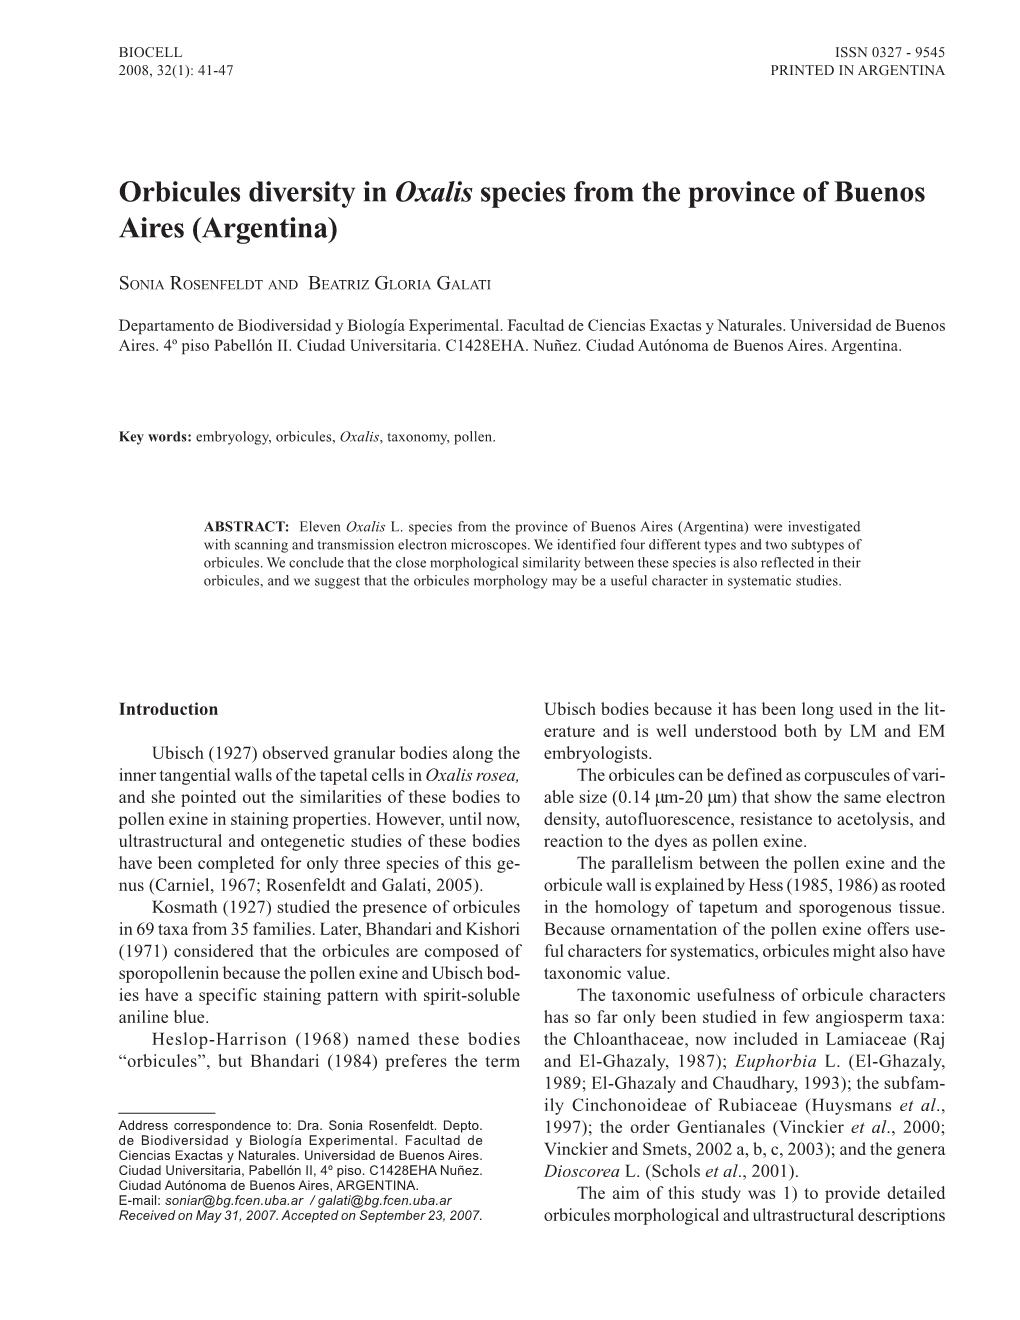 Orbicules Diversity in Oxalis Species from the Province of Buenos Aires (Argentina)